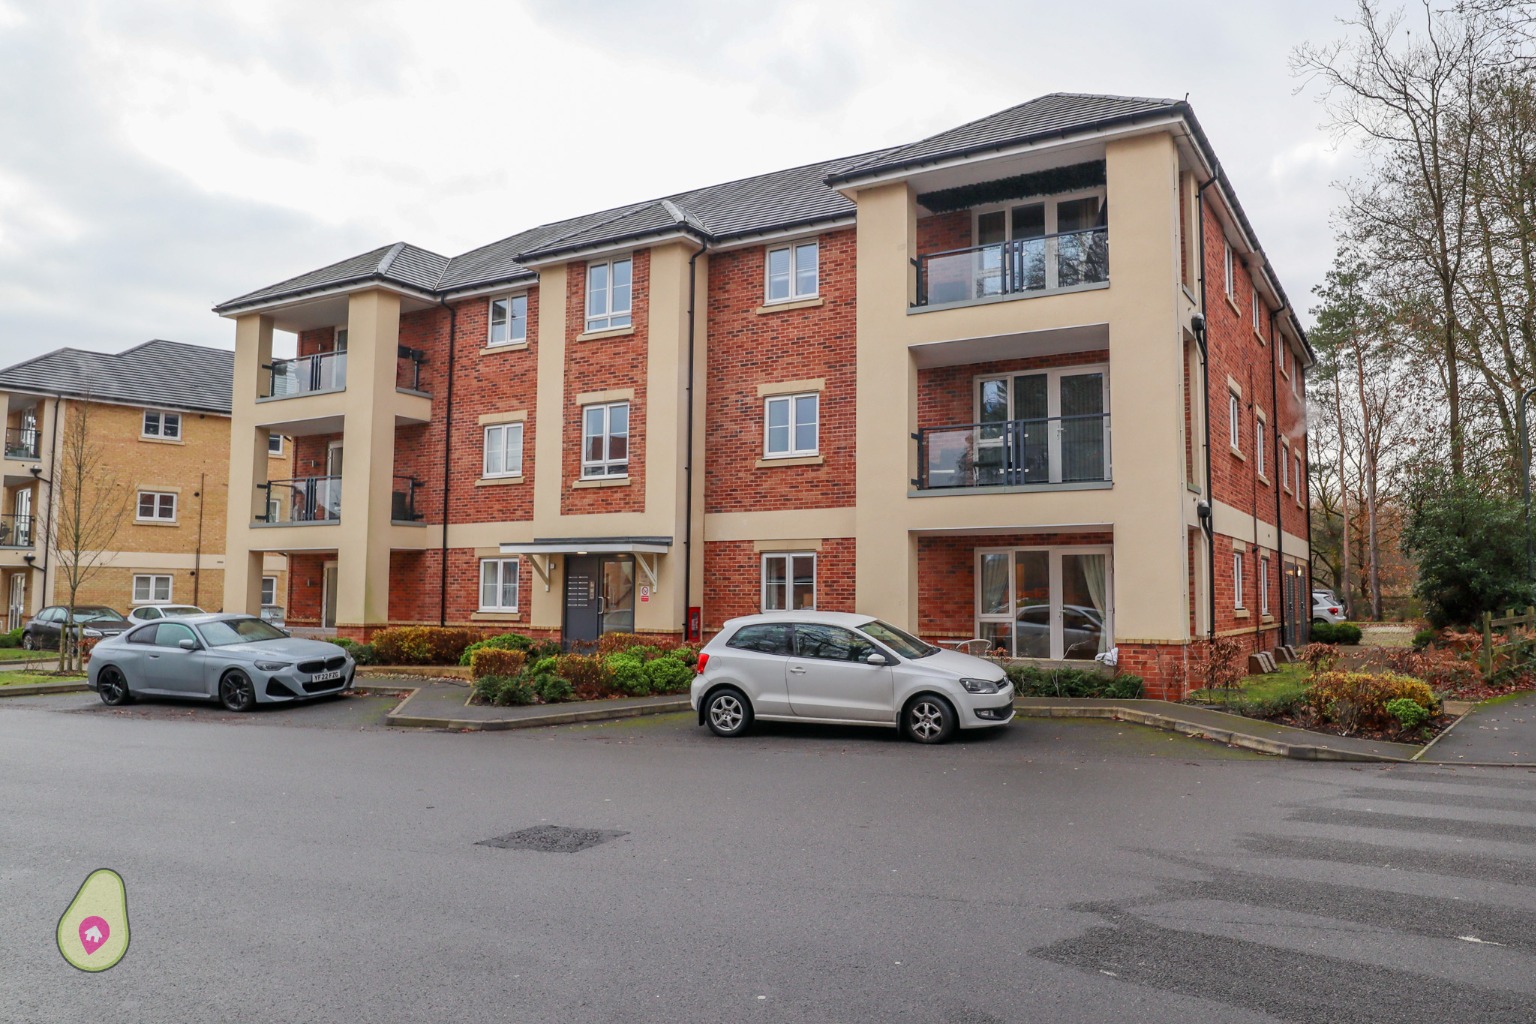 2 bed ground floor flat for sale - Property Image 1